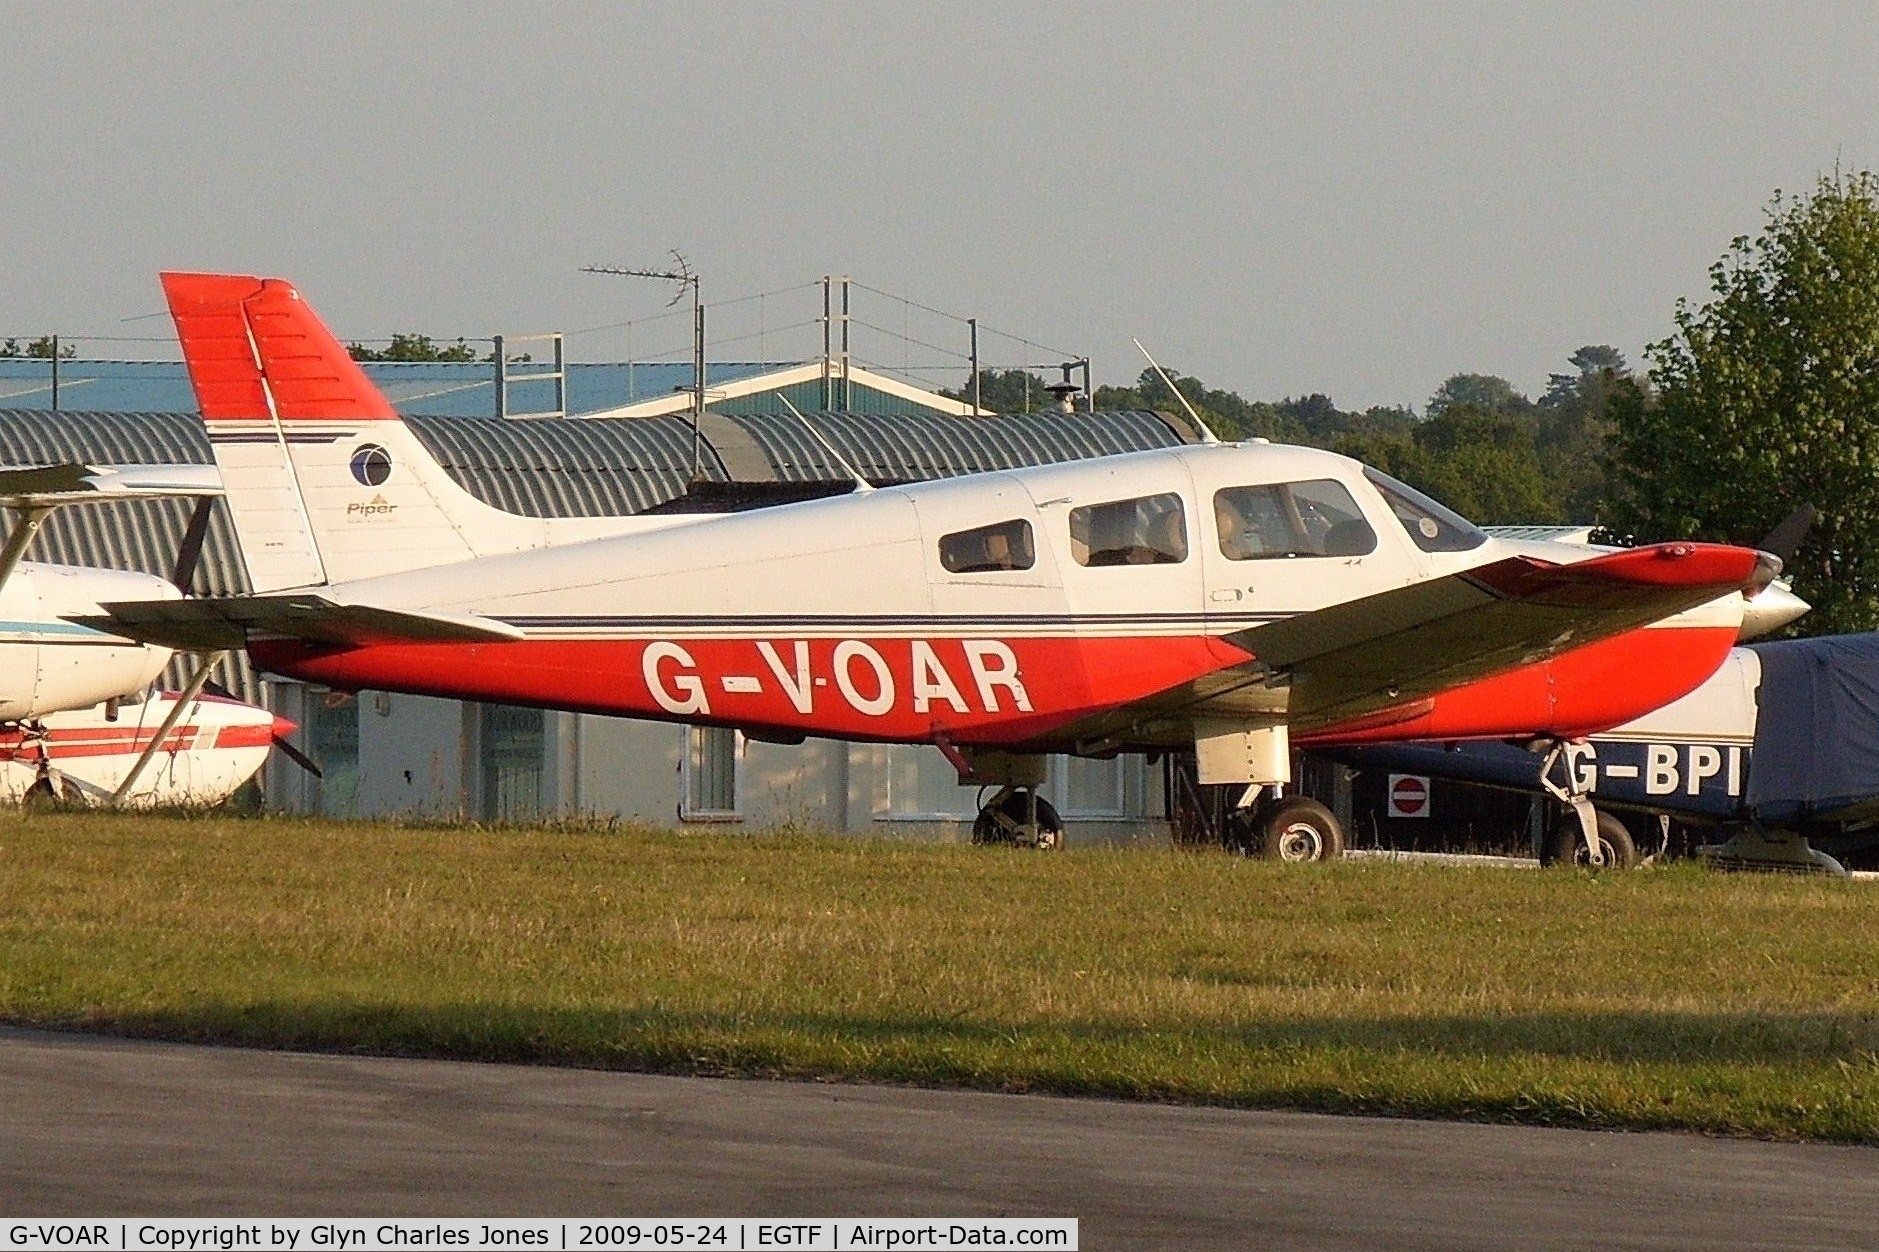 G-VOAR, 1995 Piper PA-28-181 Cherokee Archer III C/N 28-43011, Previously N9256Q. Owned by Solent Flight Ltd.